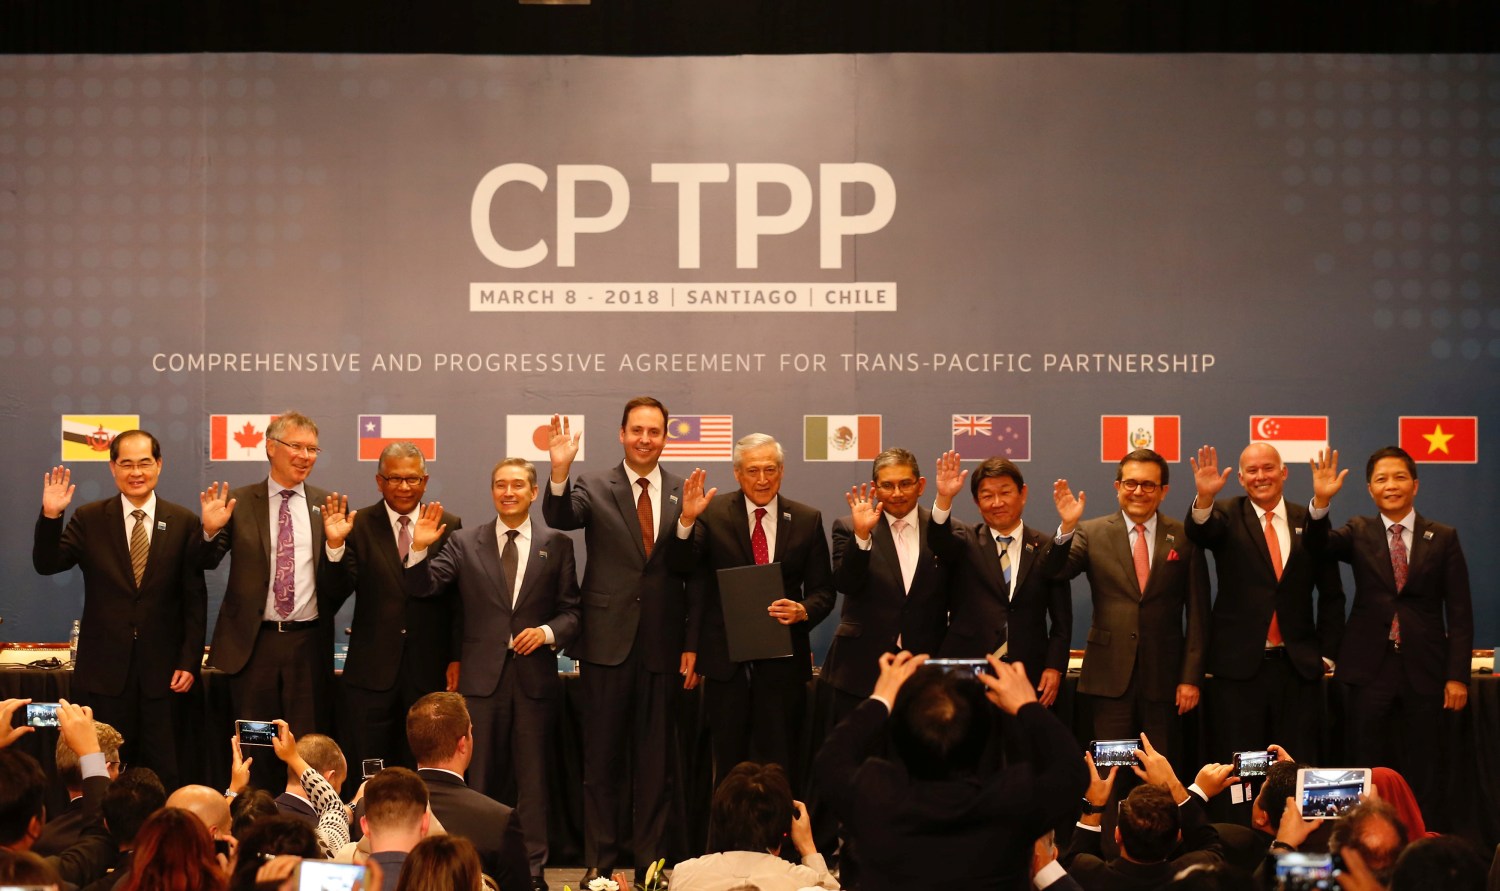 Representatives of members of Trans-Pacific Partnership (TPP) trade deal: Brunei's Acting Minister for Foreign Affairs Erywan Dato Pehin, Chile's Foreign Minister Heraldo Munoz, Australia's Trade Minister Steven Ciobo, Canada's International Trade Minister Francois-Phillippe Champagne, Singapur's Minister for Trade and Industry Lim Hng Kiang, New Zealand's Minister for Trade and Export Growth David Parker, Malaysia's Minister for Trade and Industry Datuk J. Jayasiri, Japan's Minister of Economic Revitalization Toshimitsu Motegi, Mexico's Secretary of Economy Ildefonso Guajardo Villarreal, Peru's Minister of Foreign Trade and Tourism Eduardo Ferreyros Kuppers and Vietnam's Industry and Trade Minister Tran Tuan Anh, wave as they pose for an official picture after the signing agreement ceremony in Santiago, Chile March 8, 2018. REUTERS/Rodrigo Garrido - RC1F528E2050